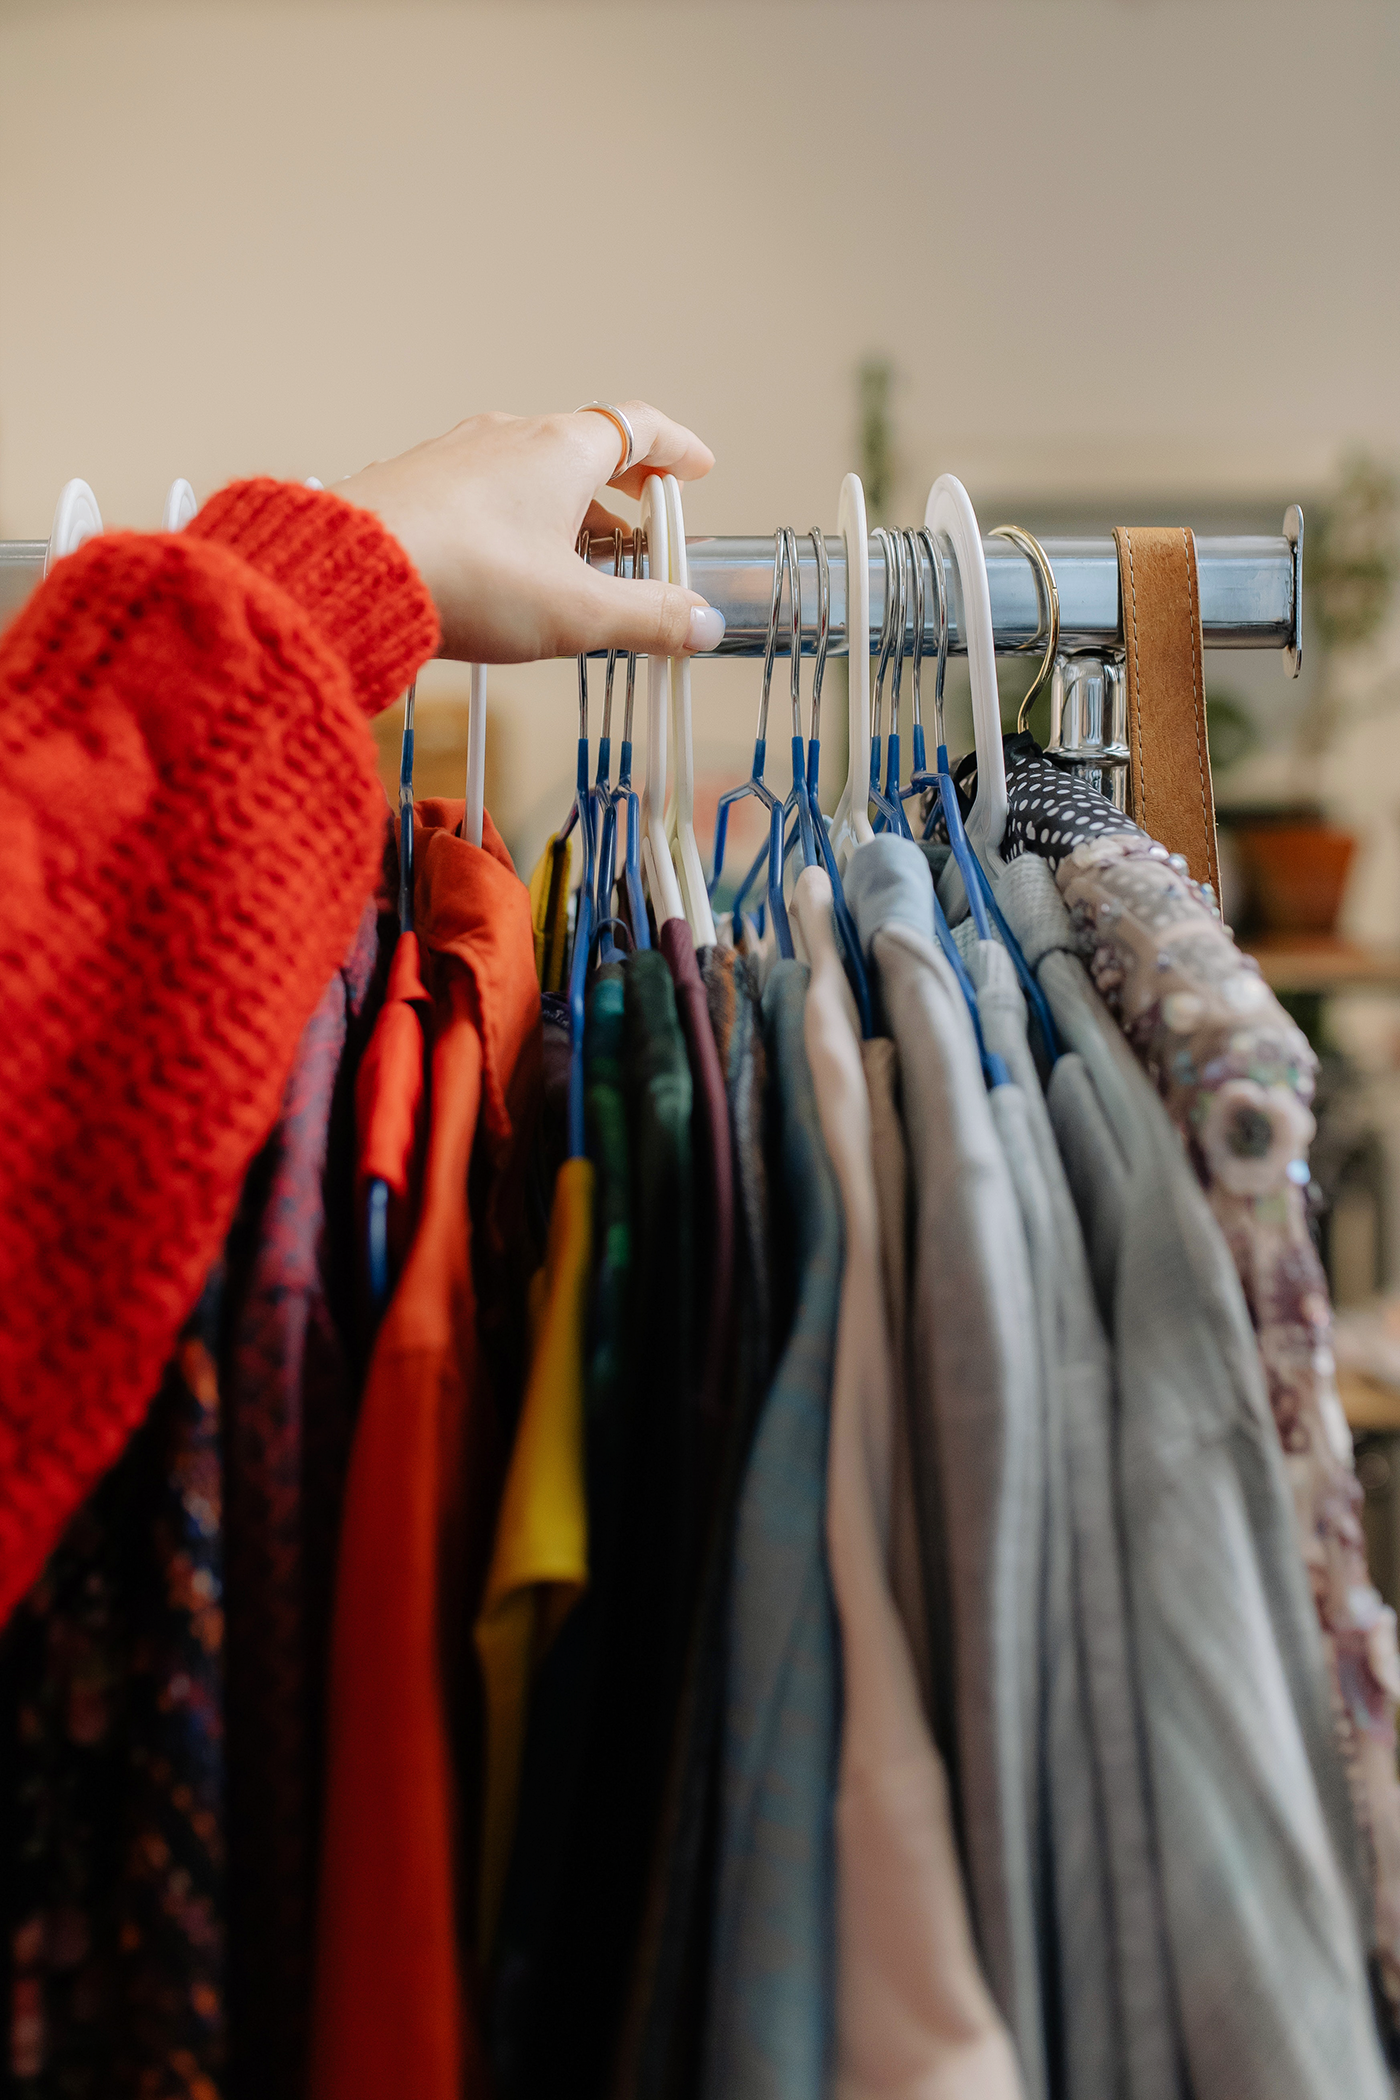 Tax-Deductible Clothing Donations Are Great, Except Your Used